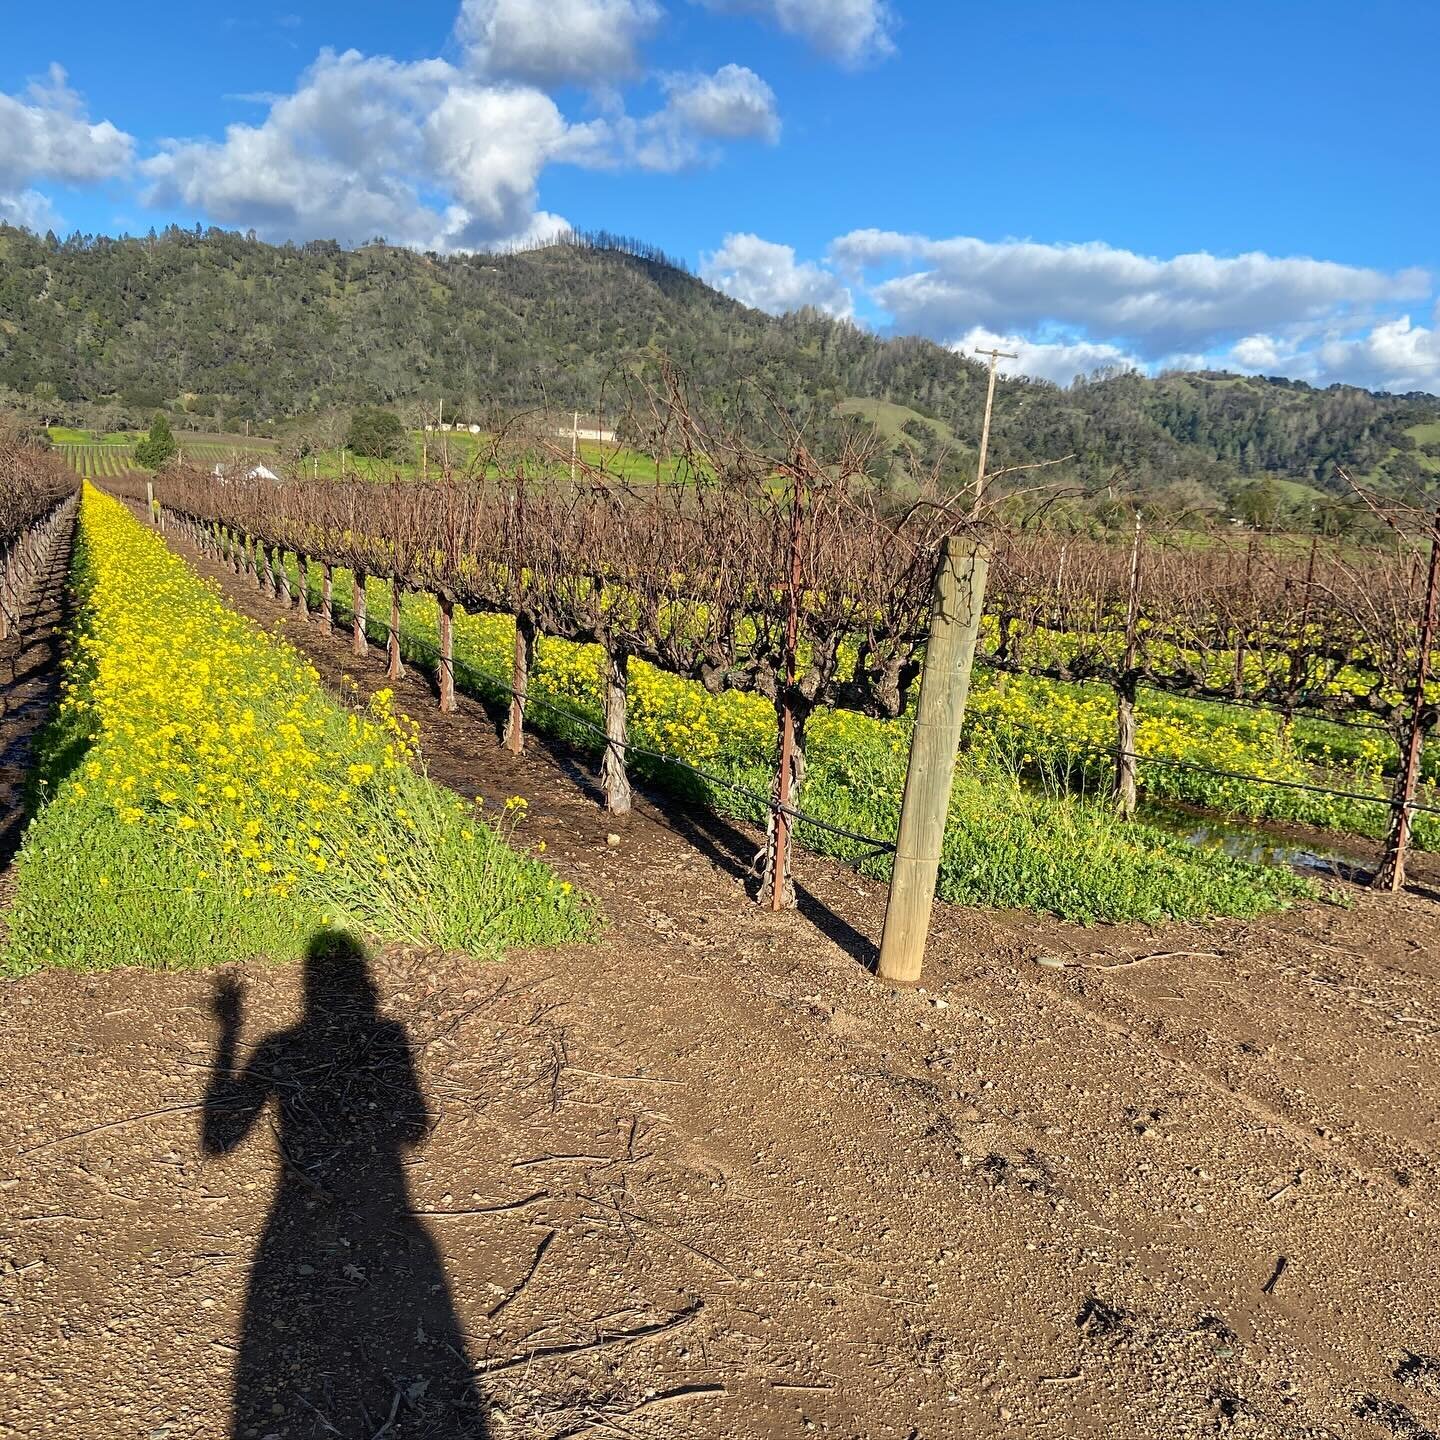 Mustard flowers and grape vines - must be Napa. ✌️
.
.
.
This combo always reminds me of heading to the #healthykitchenshealthylives conference, excited to be a part of it again. #bringiton @theculinaryinstituteofamerica